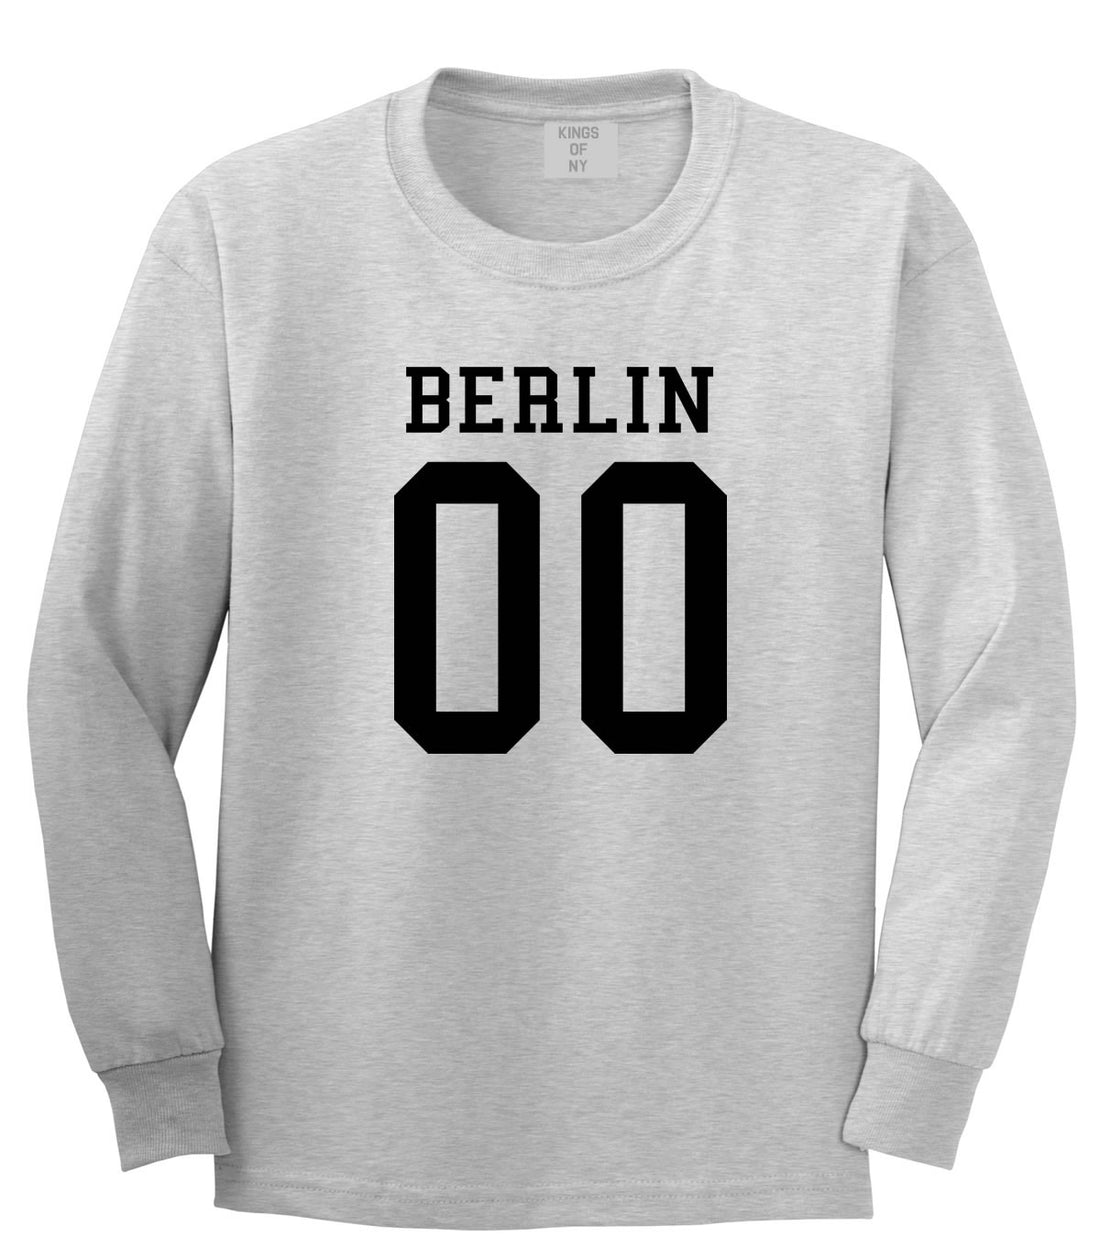 Berlin Team Jersey Germany Country Long Sleeve T-Shirt in Grey By Kings Of NY